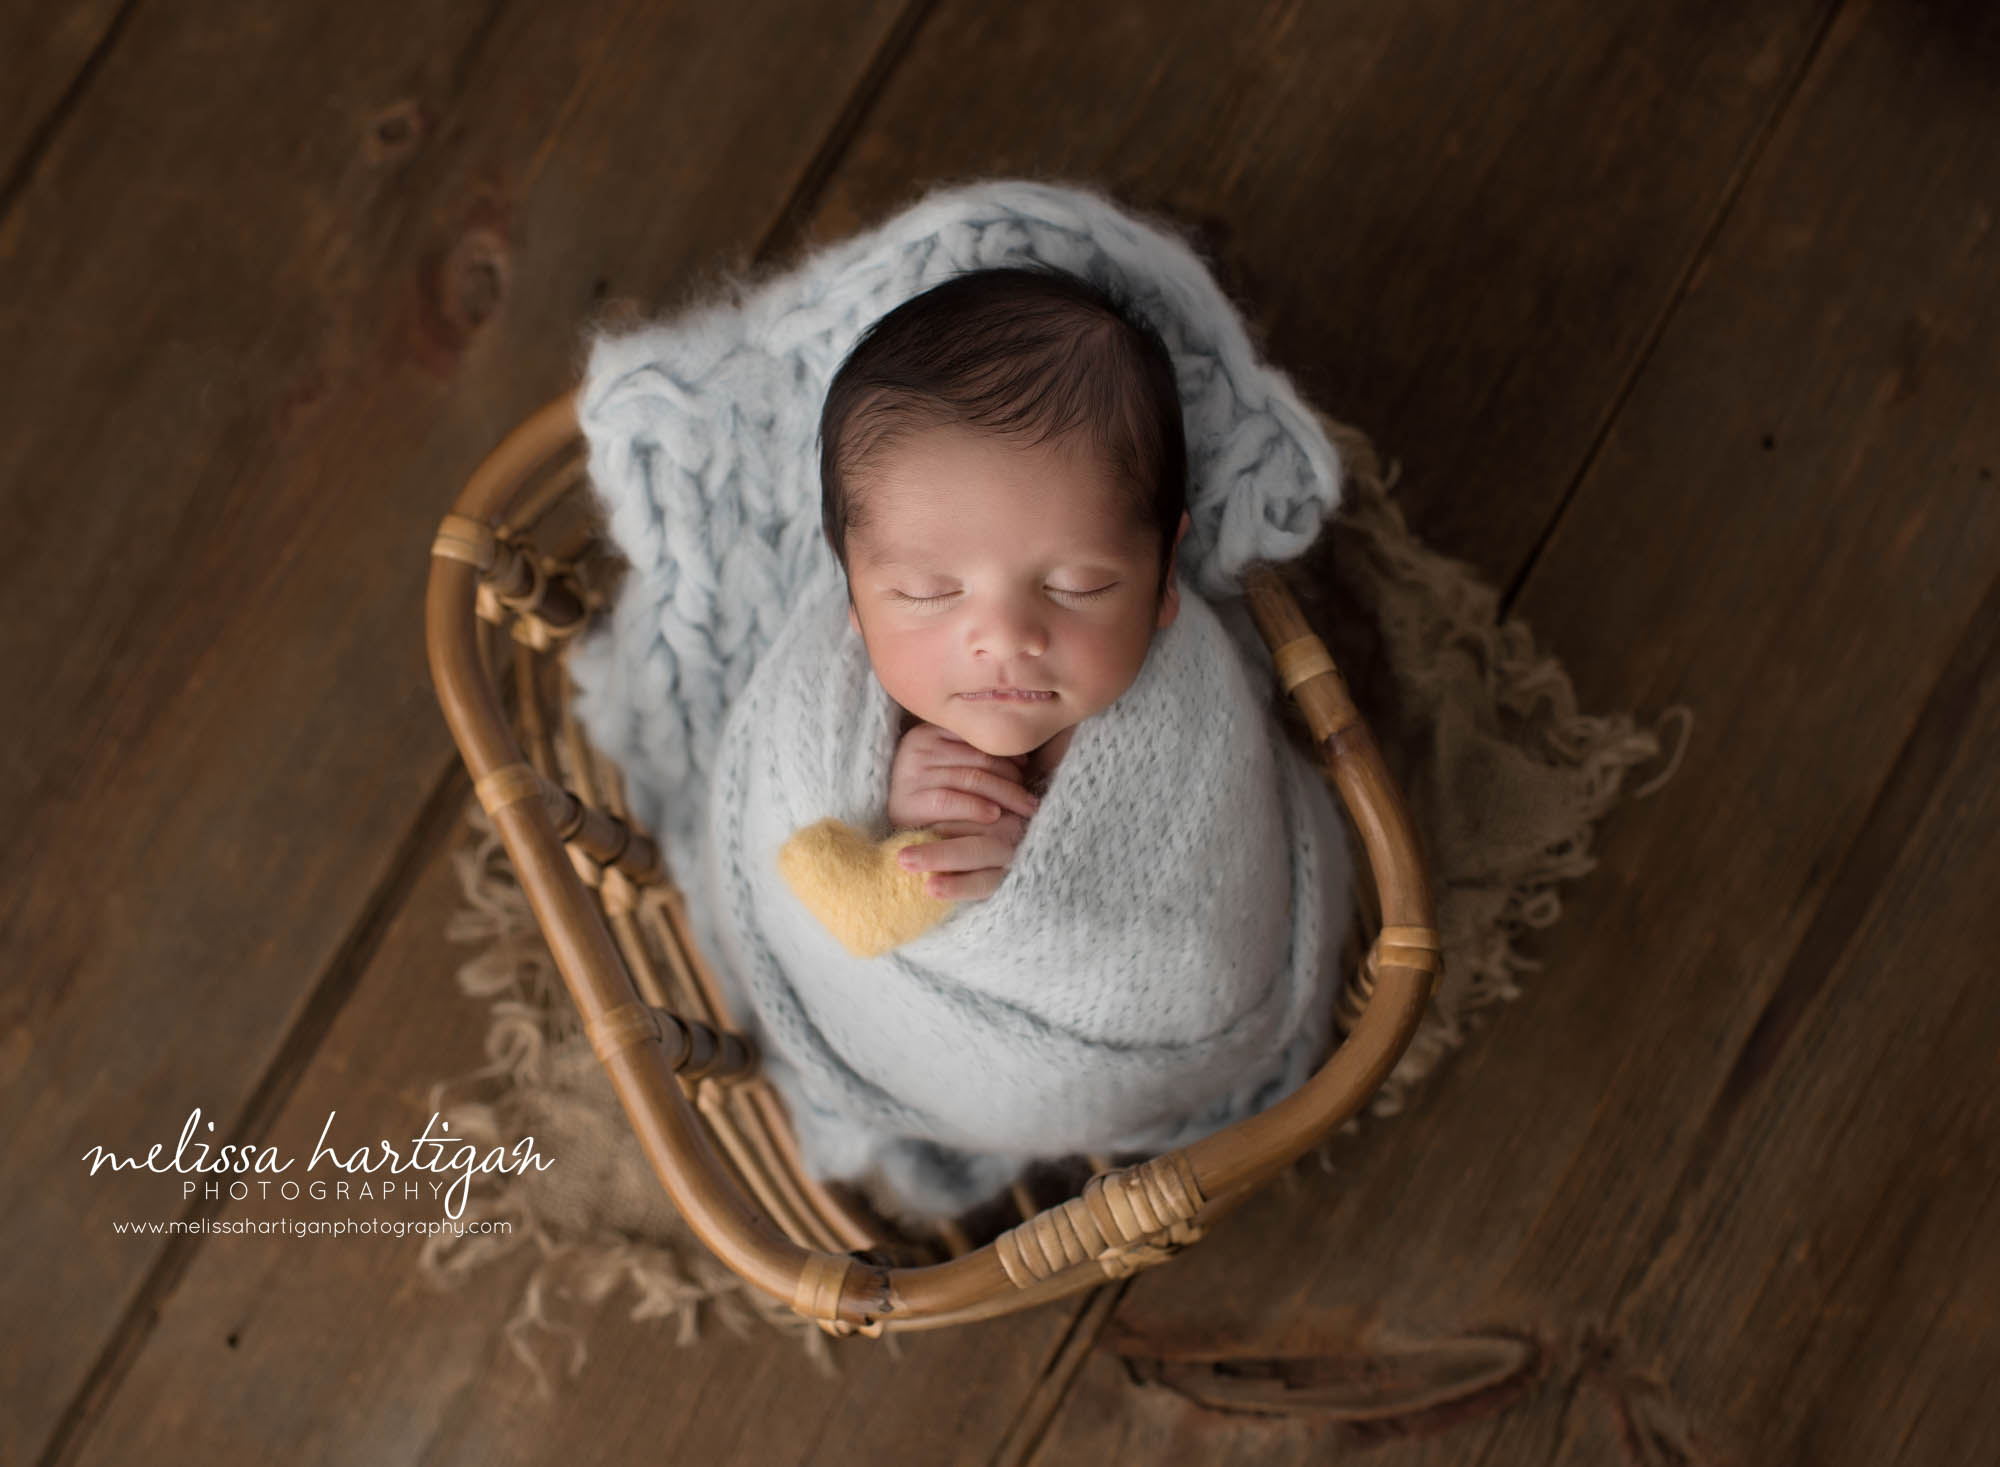 newborn baby boy wrapped in light blue wrap posed in basket holding yellow felted heart prop